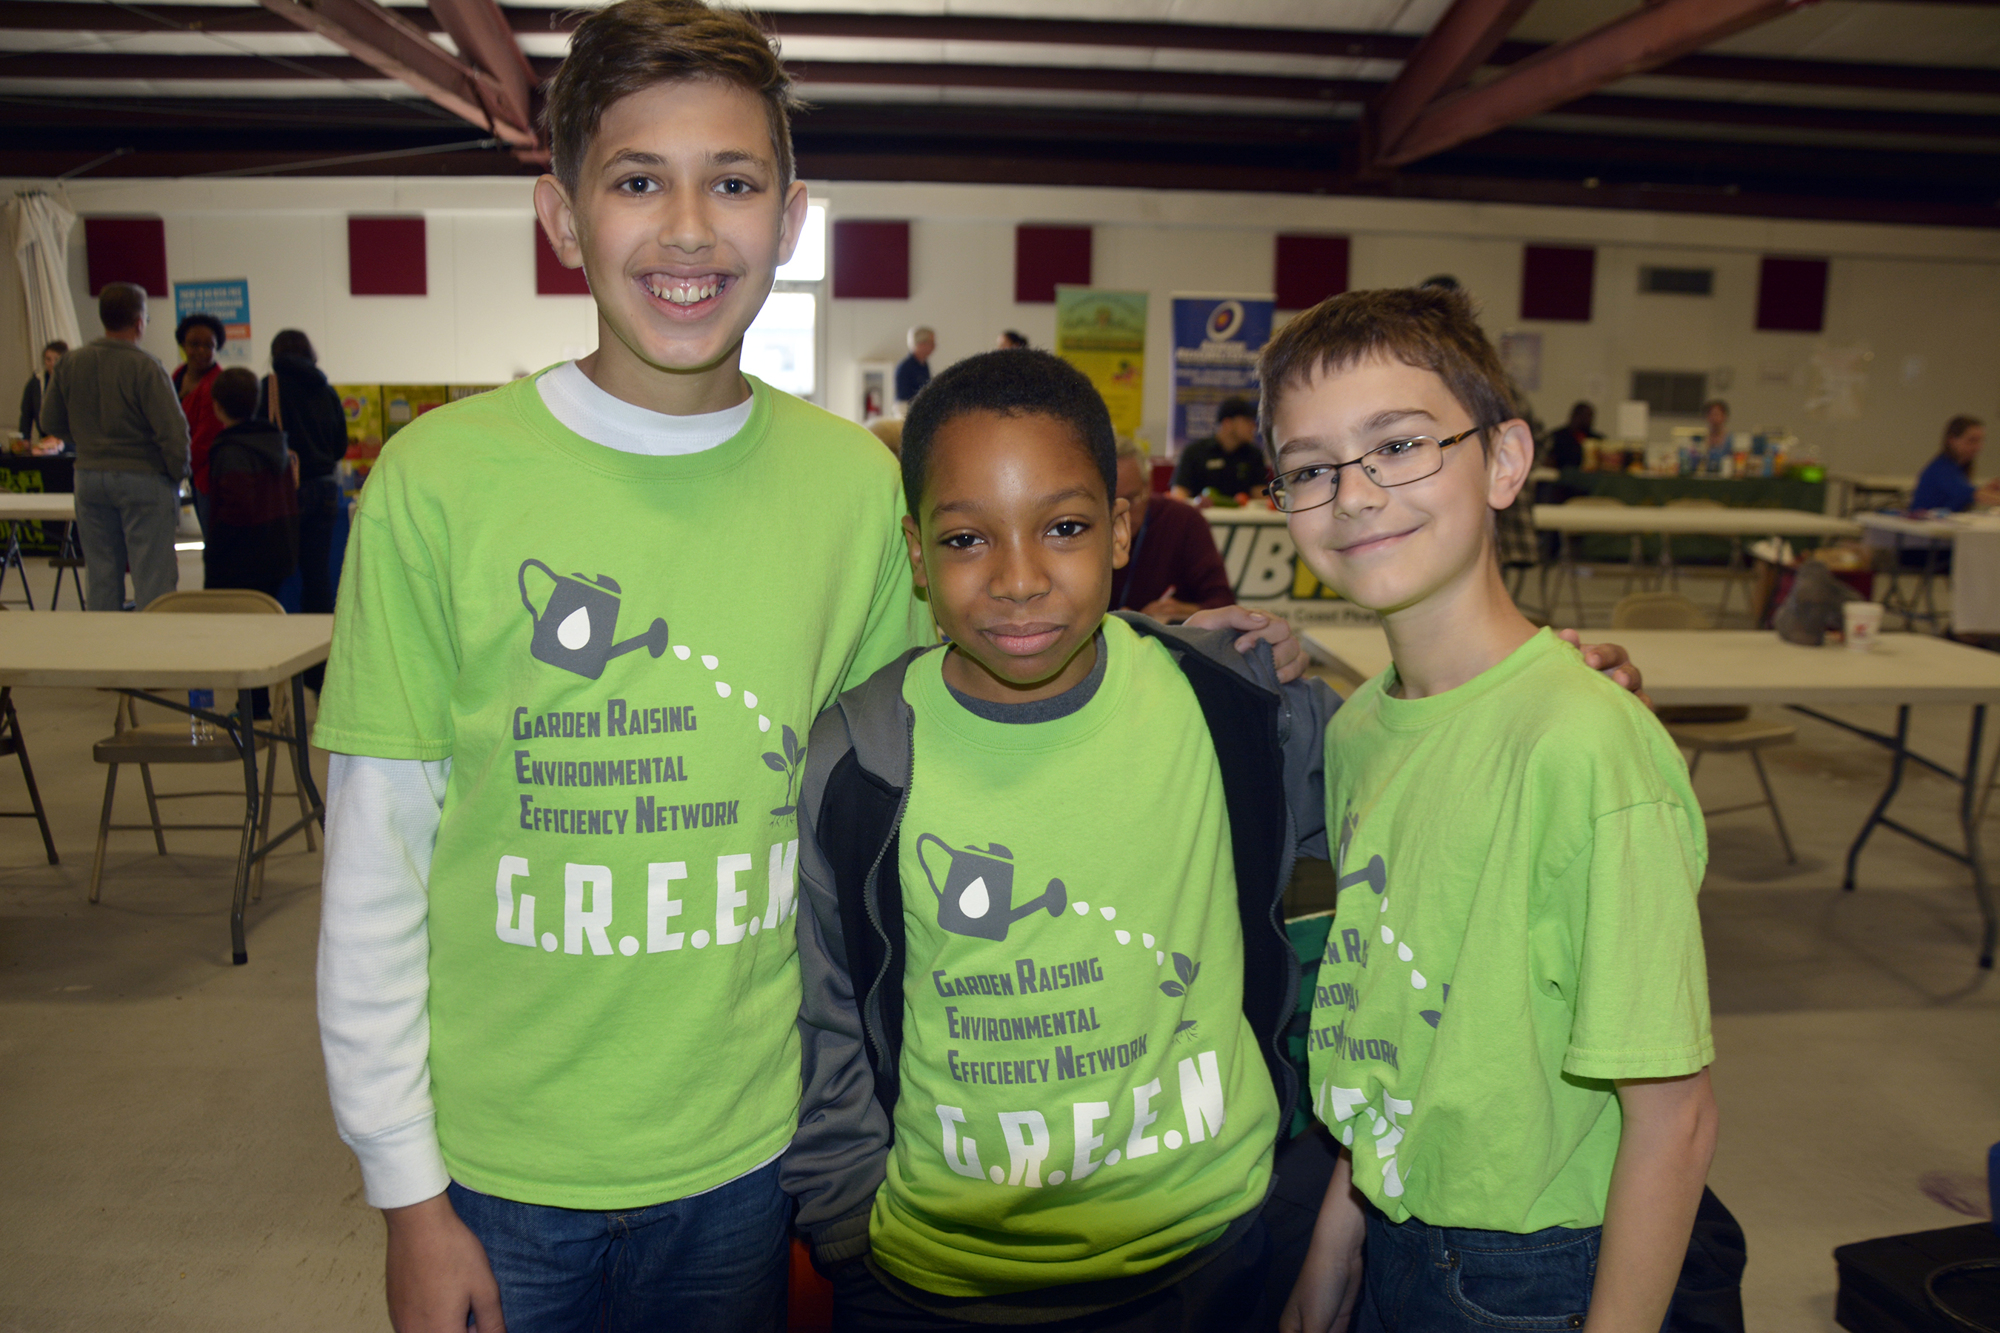 Bunnell Elementry School students Danny Wolcott, Jermaine Bucknor and Jackson McMillan set up a booth at the BTES Health Fair to bring awareness to the Flagler County families in need with their Garden Raising Environmental Efficiency Network. (G.R.E.E.N.